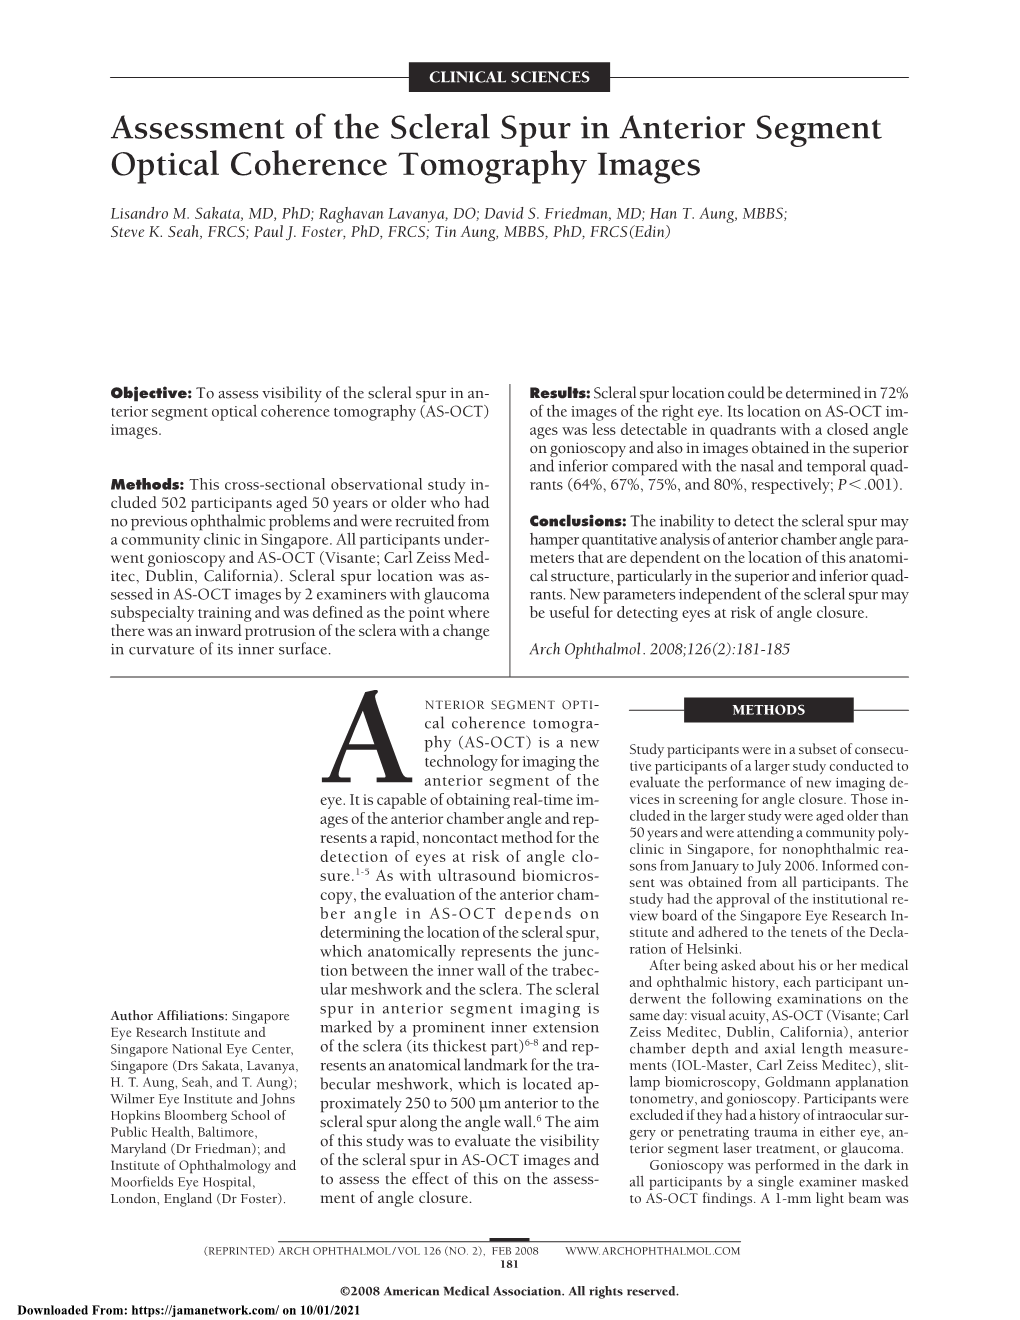 Assessment of the Scleral Spur in Anterior Segment Optical Coherence Tomography Images